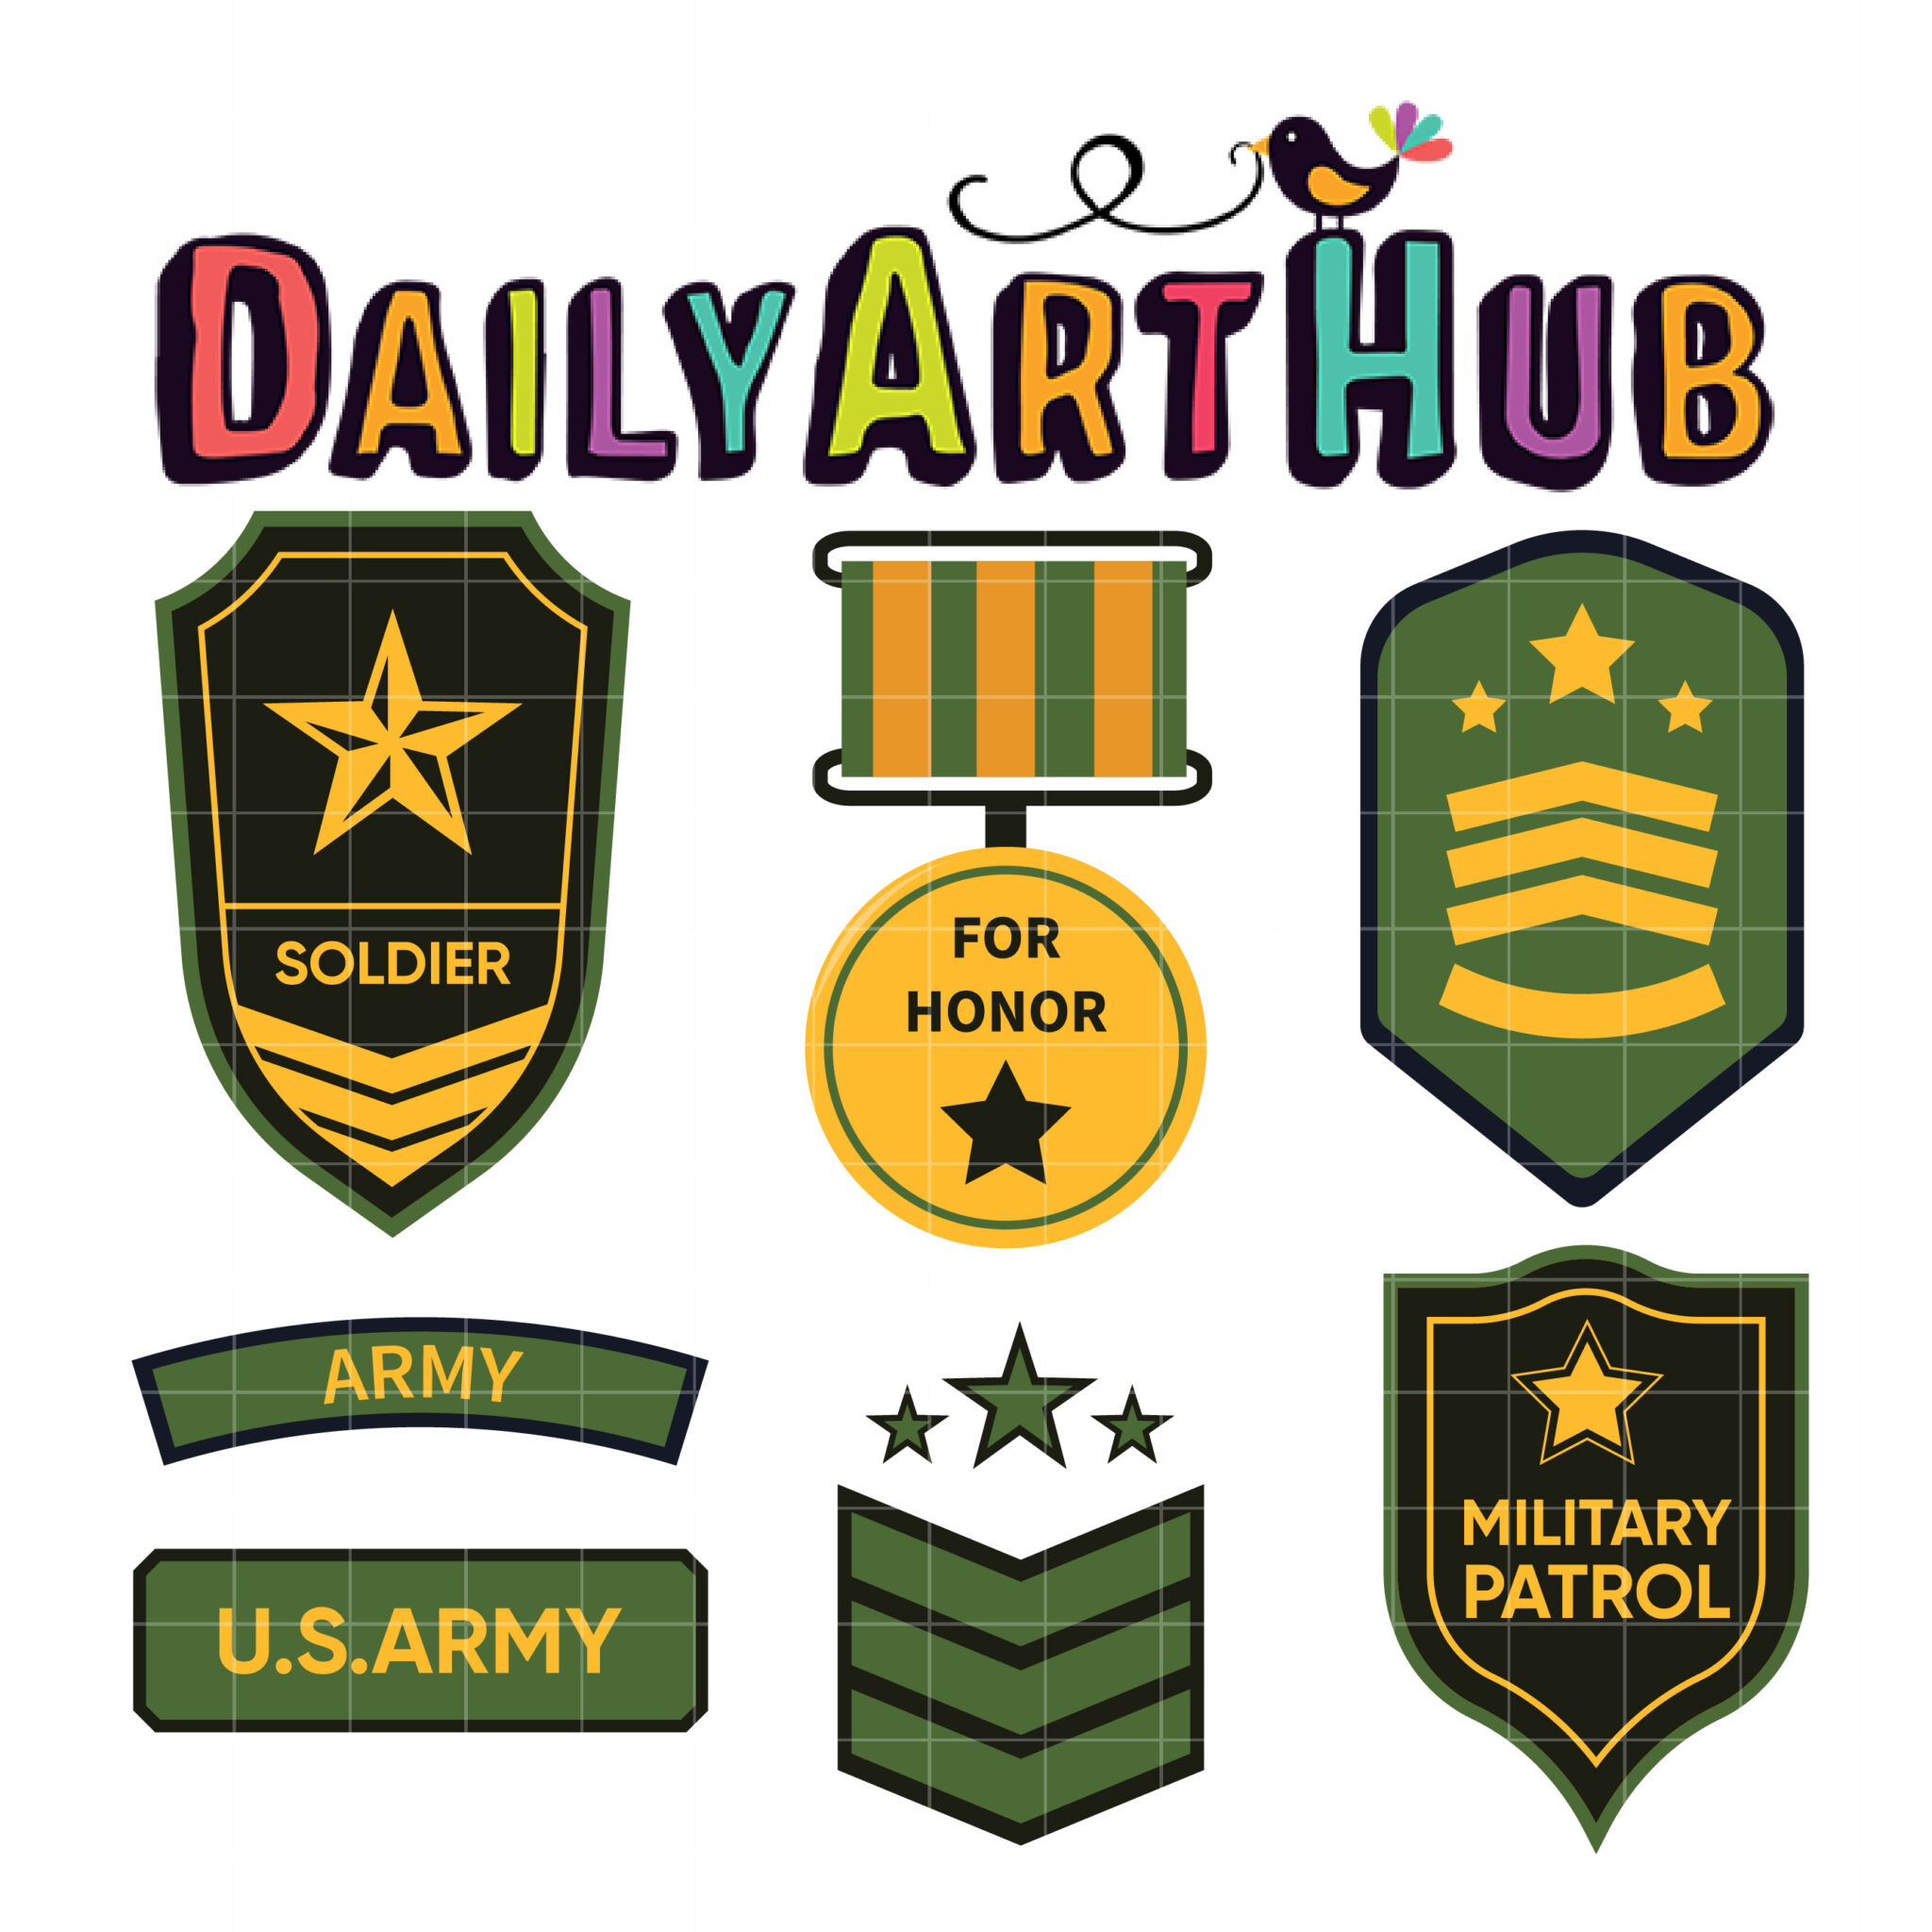 https://www.dailyarthub.com/wp-content/uploads/2021/01/Army-Soldier-Badge-scaled.jpg